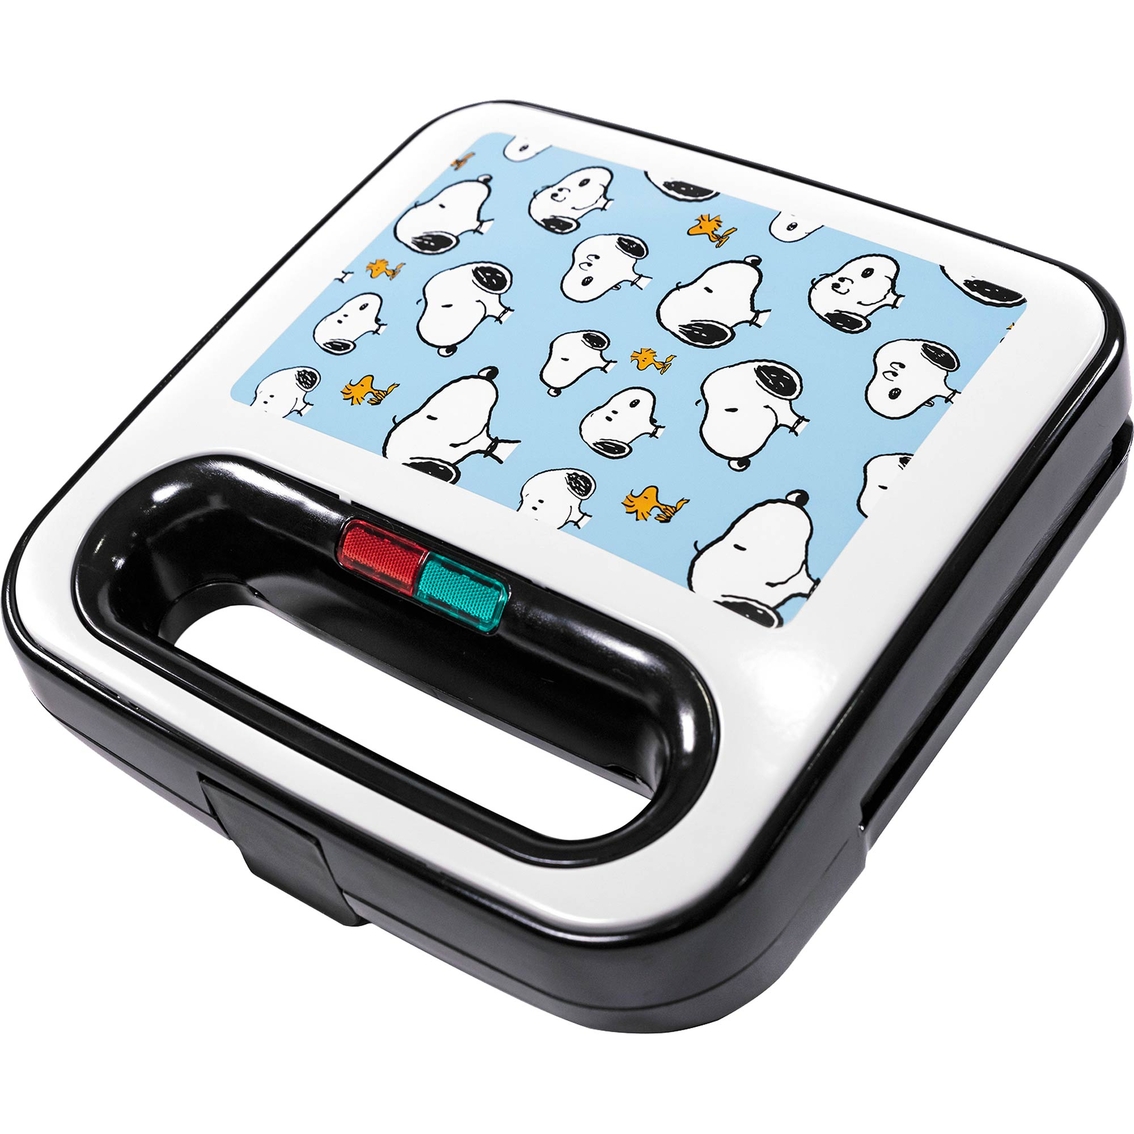 Peanuts Snoopy & Woodstock Double-Square Waffle Maker - Image 2 of 6